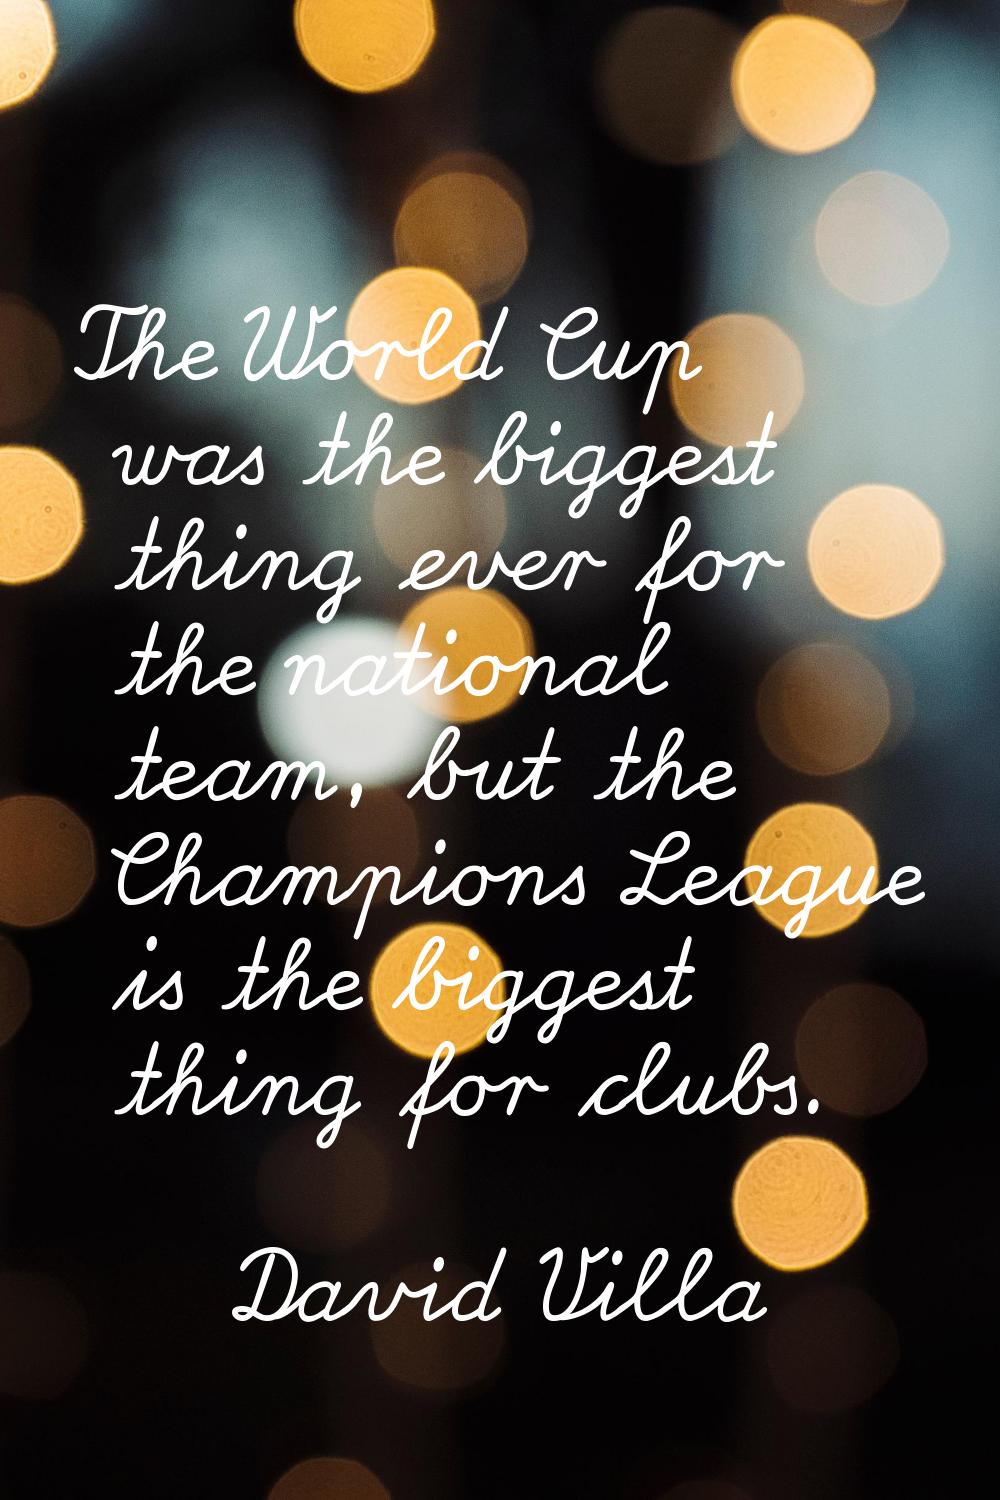 The World Cup was the biggest thing ever for the national team, but the Champions League is the big